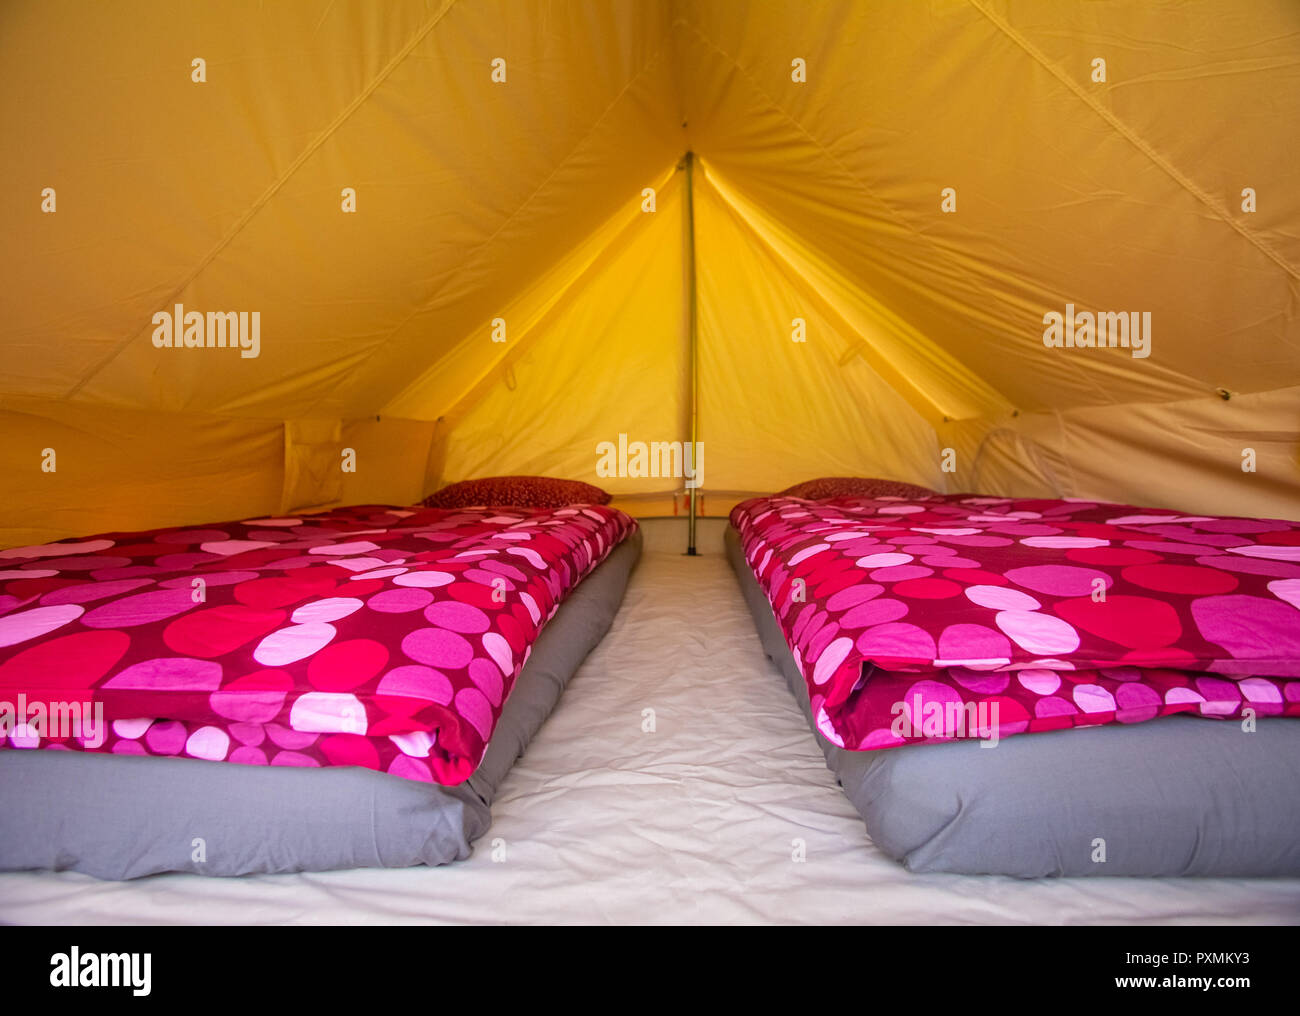 Tent interior with mattresses and purple duvet covers. Stock Photo